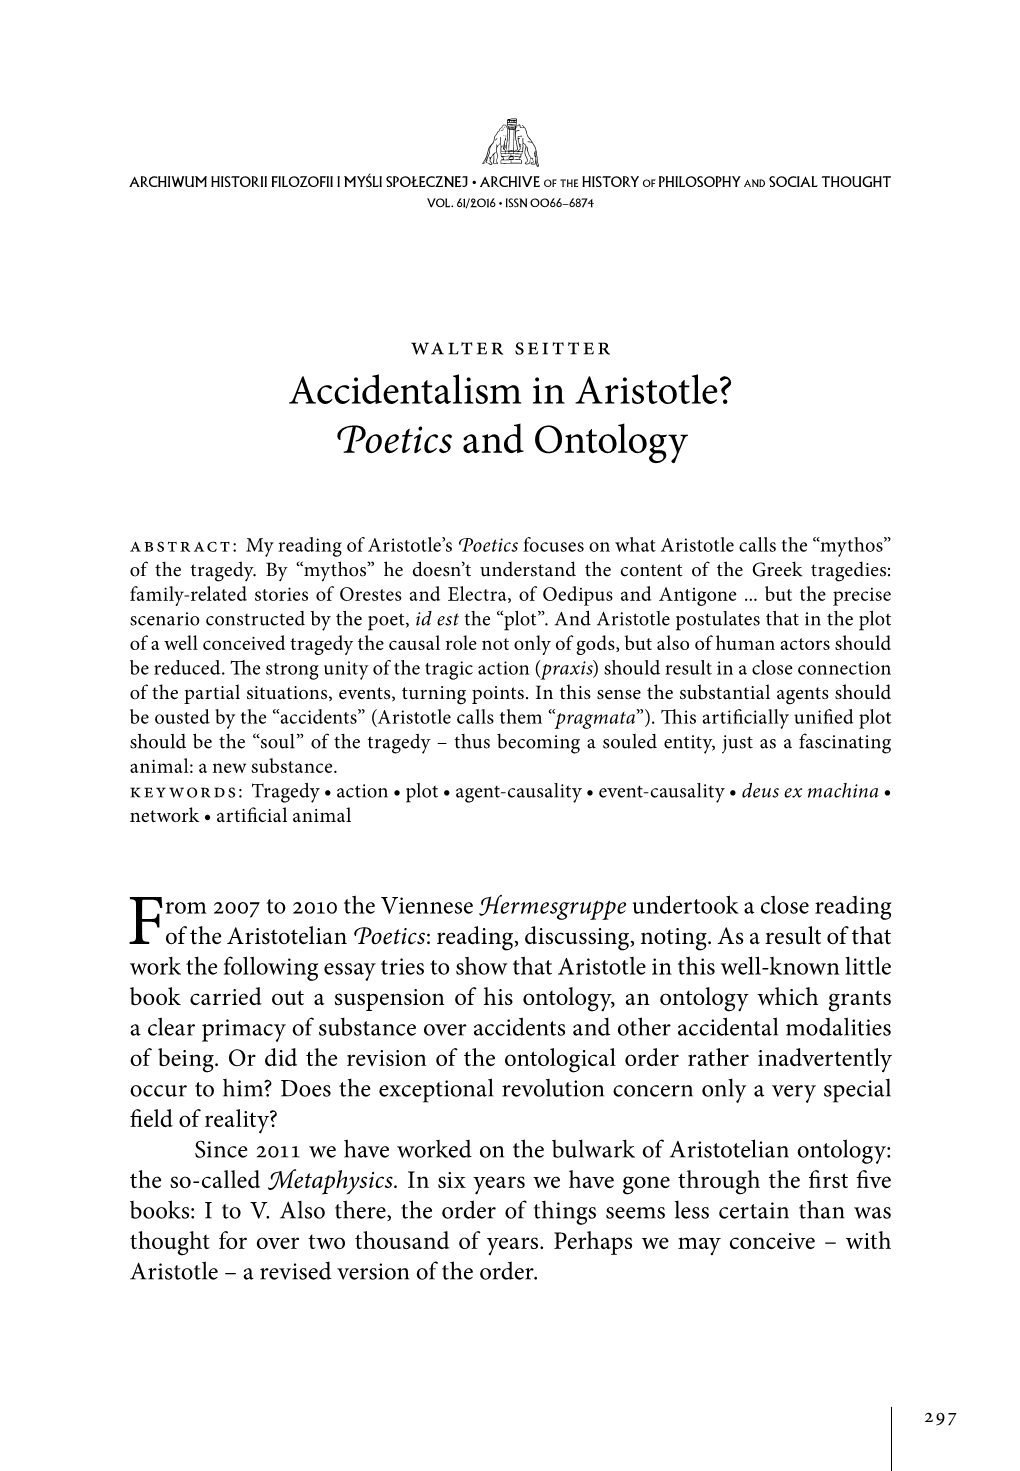 Accidentalism in Aristotle? Poetics and Ontology